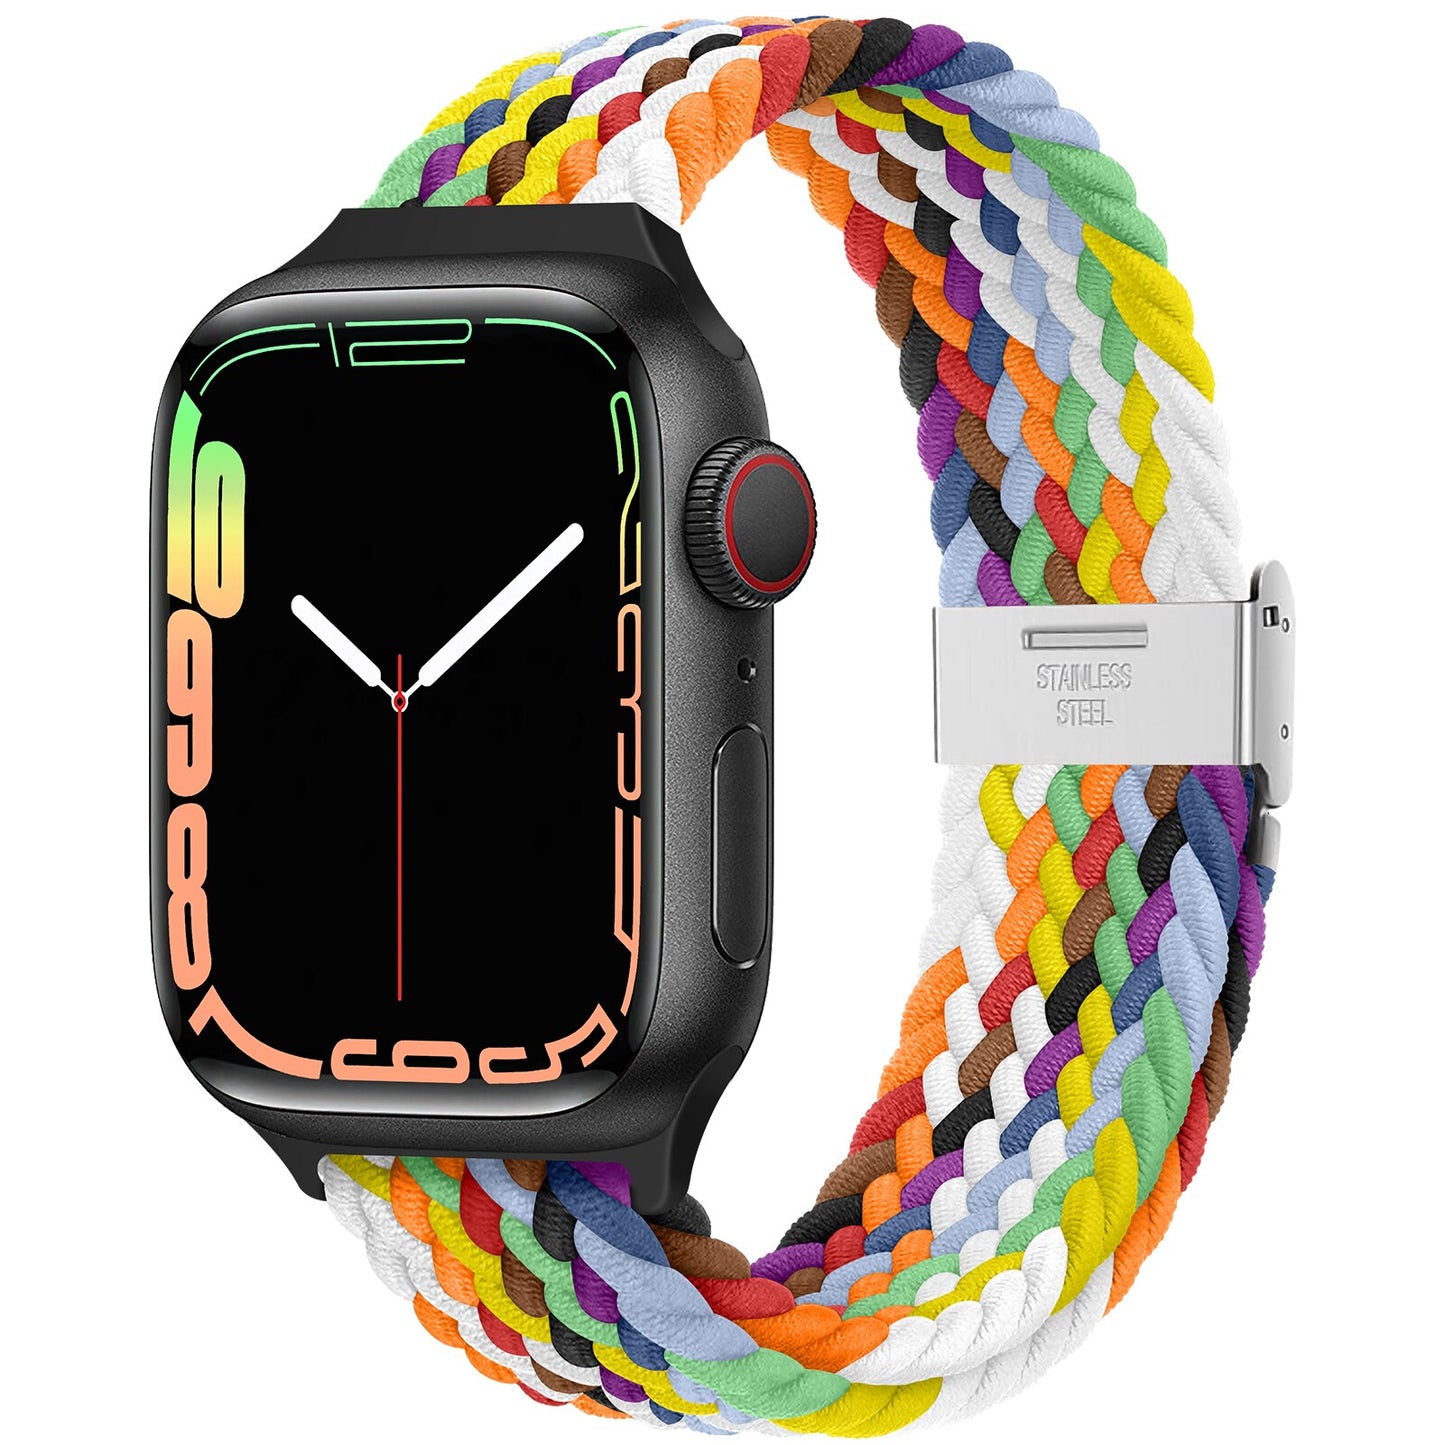 Slim Braided Band For Apple watch